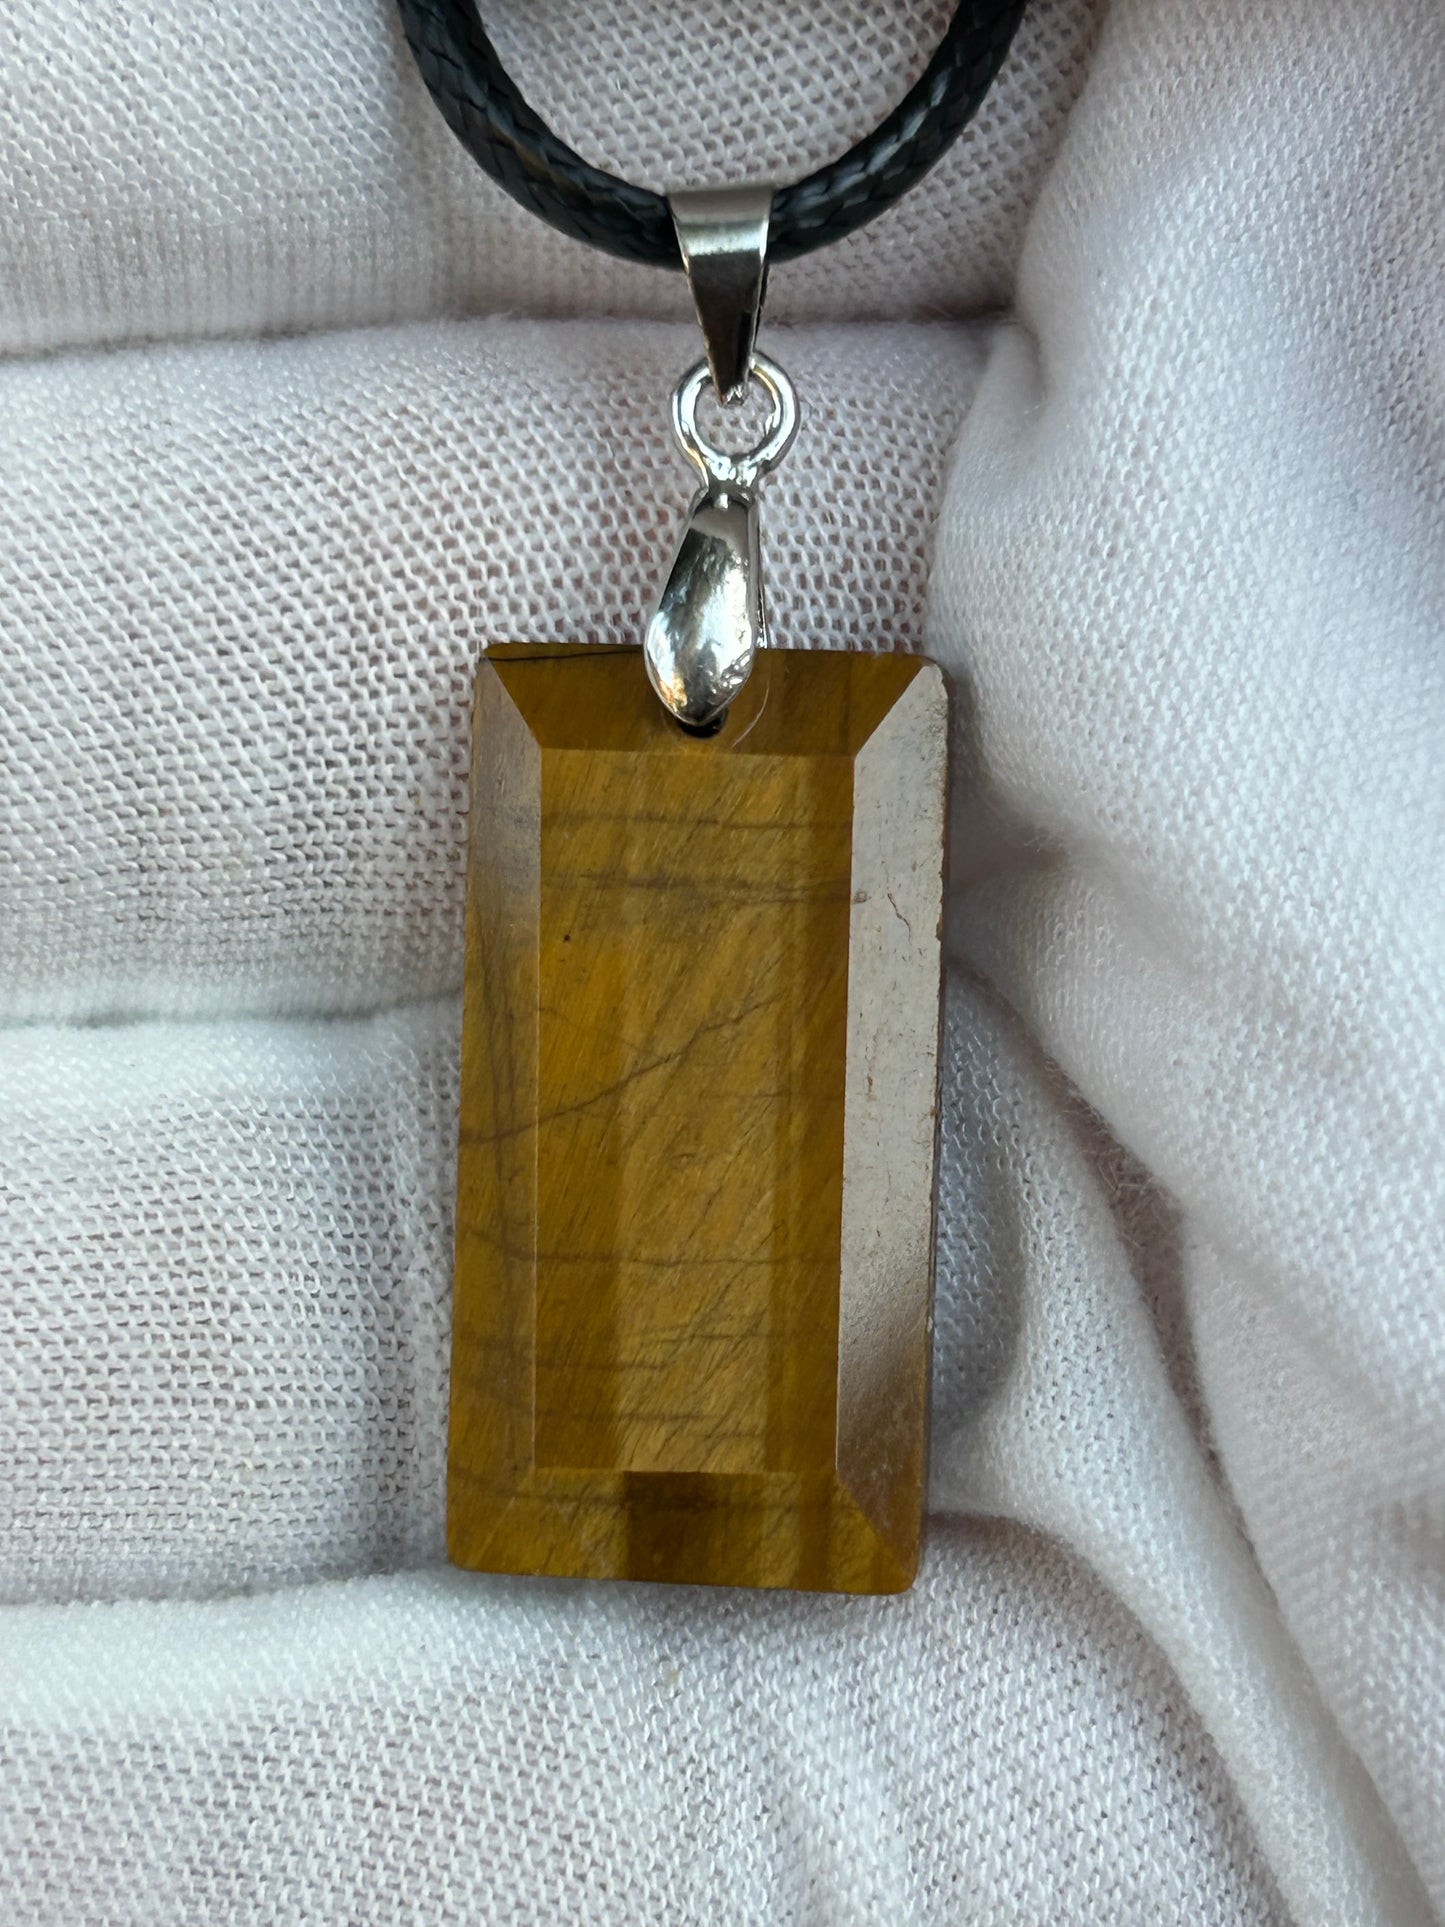 Tigers eye polished rectangular pendant with silver pendant attachment and black cord necklace